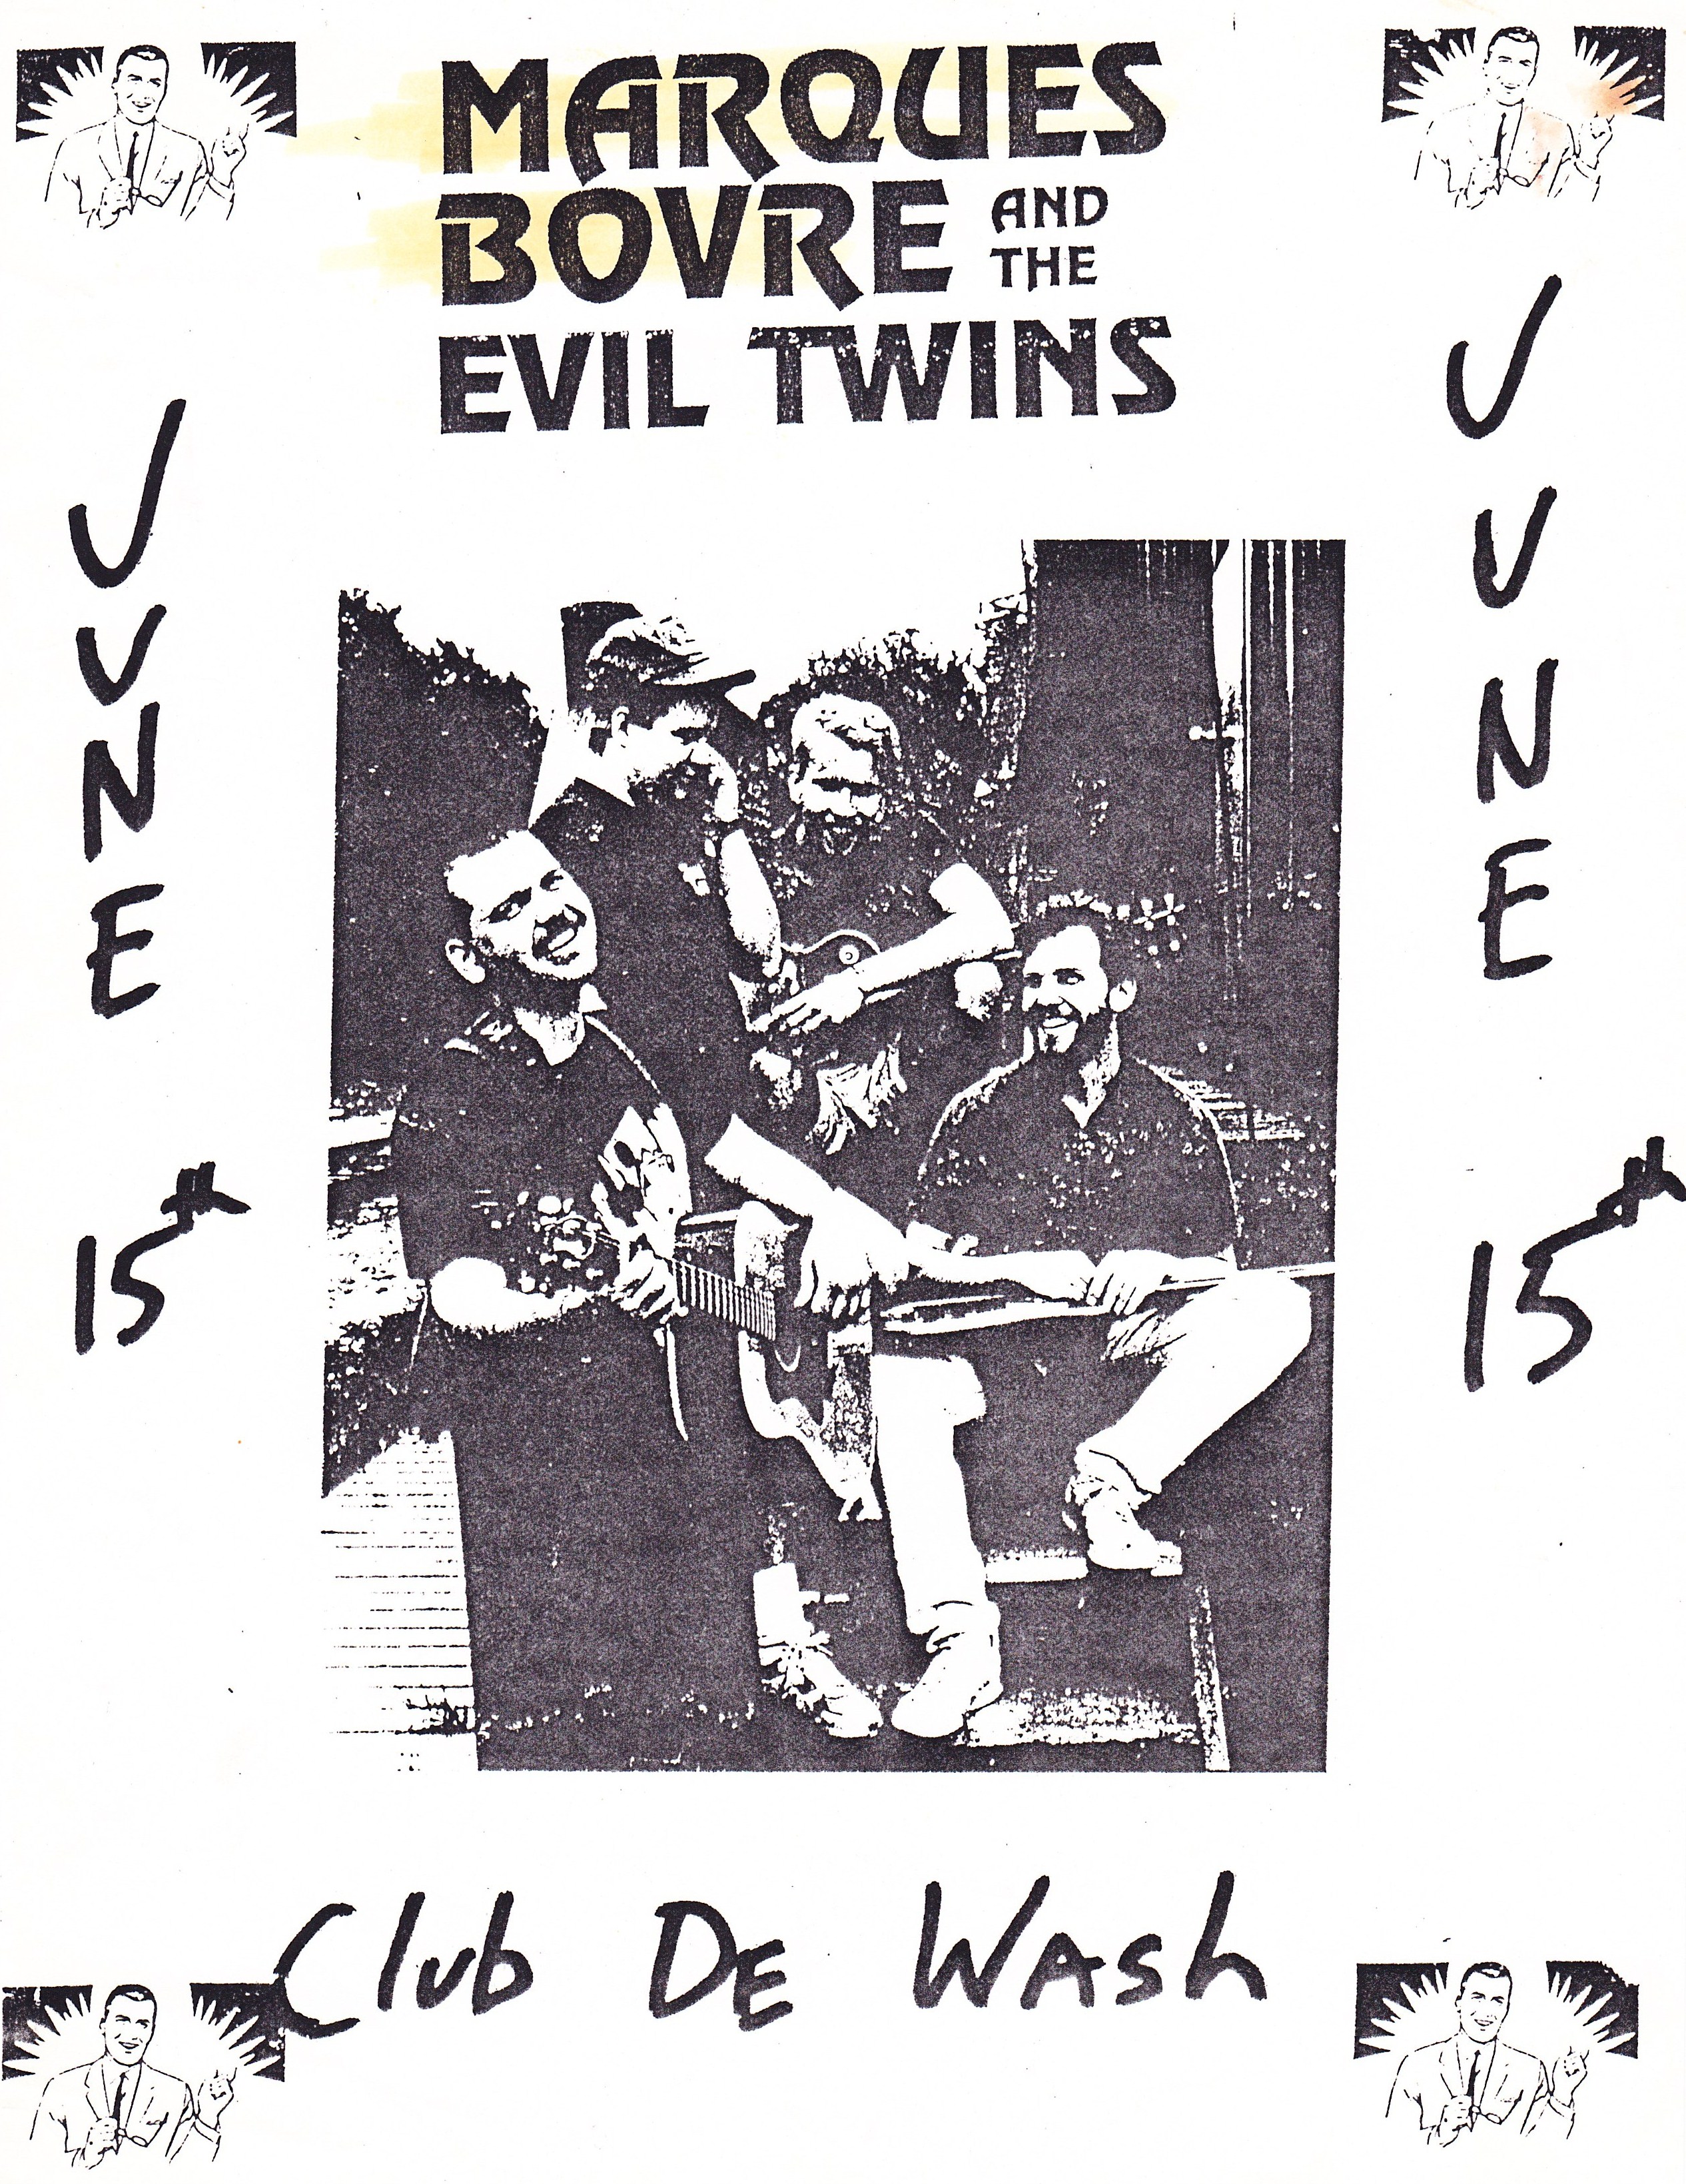 Marques Bovre and the Evil Twins, June 15, 1990